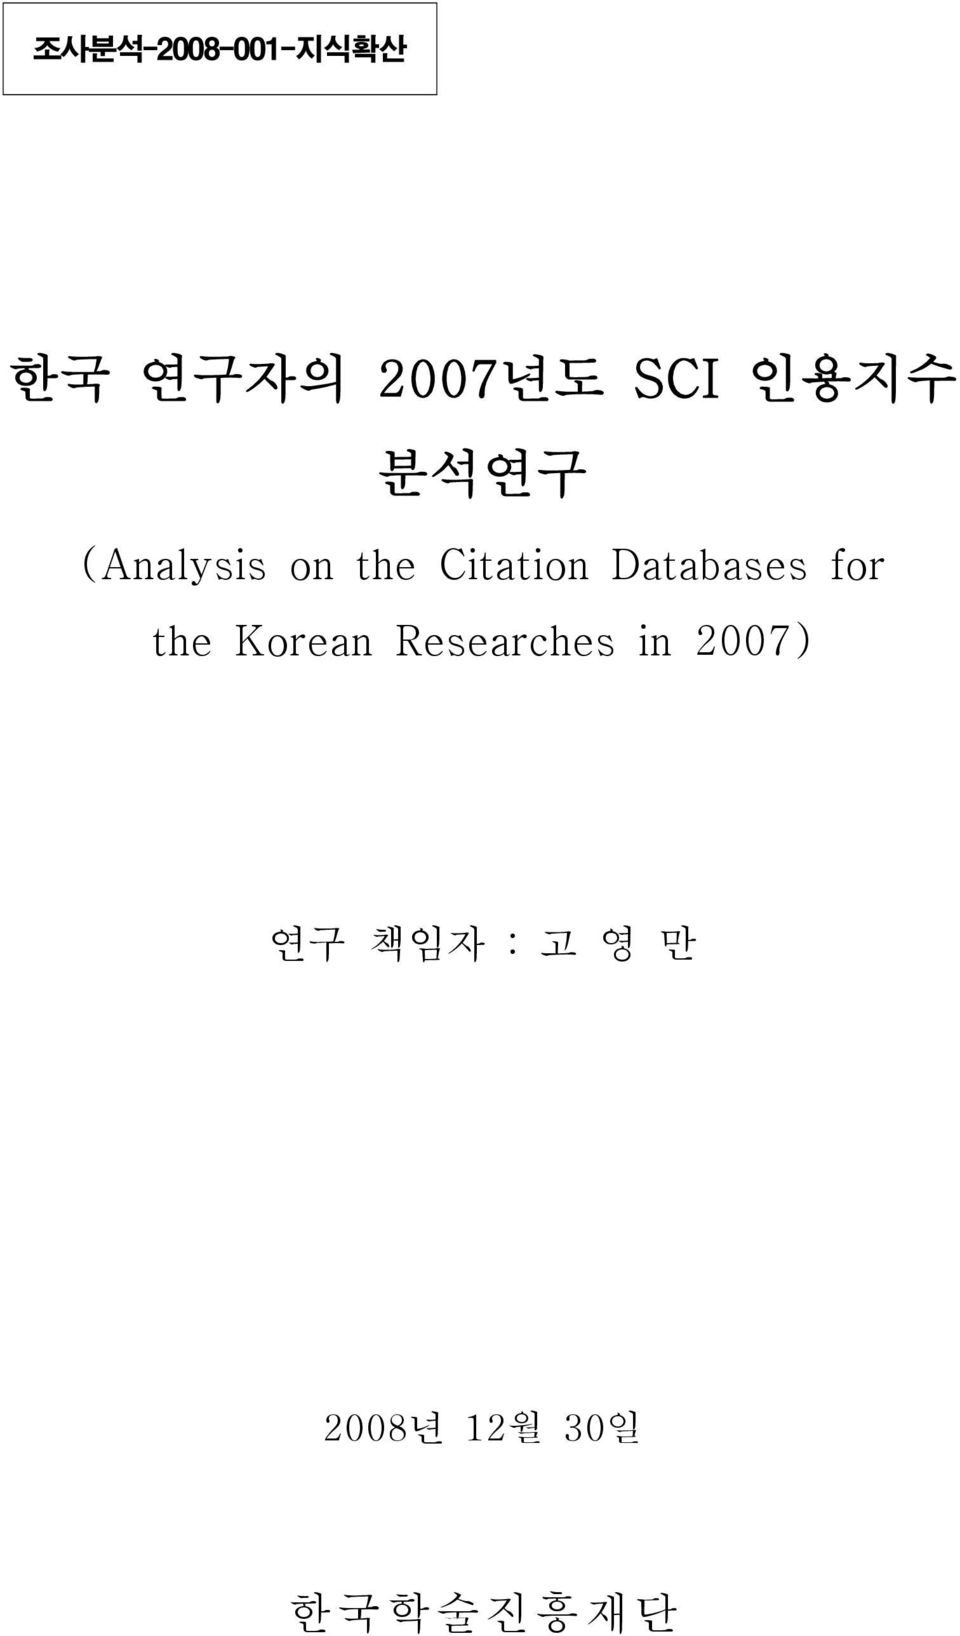 Databases for the Korean Researches in